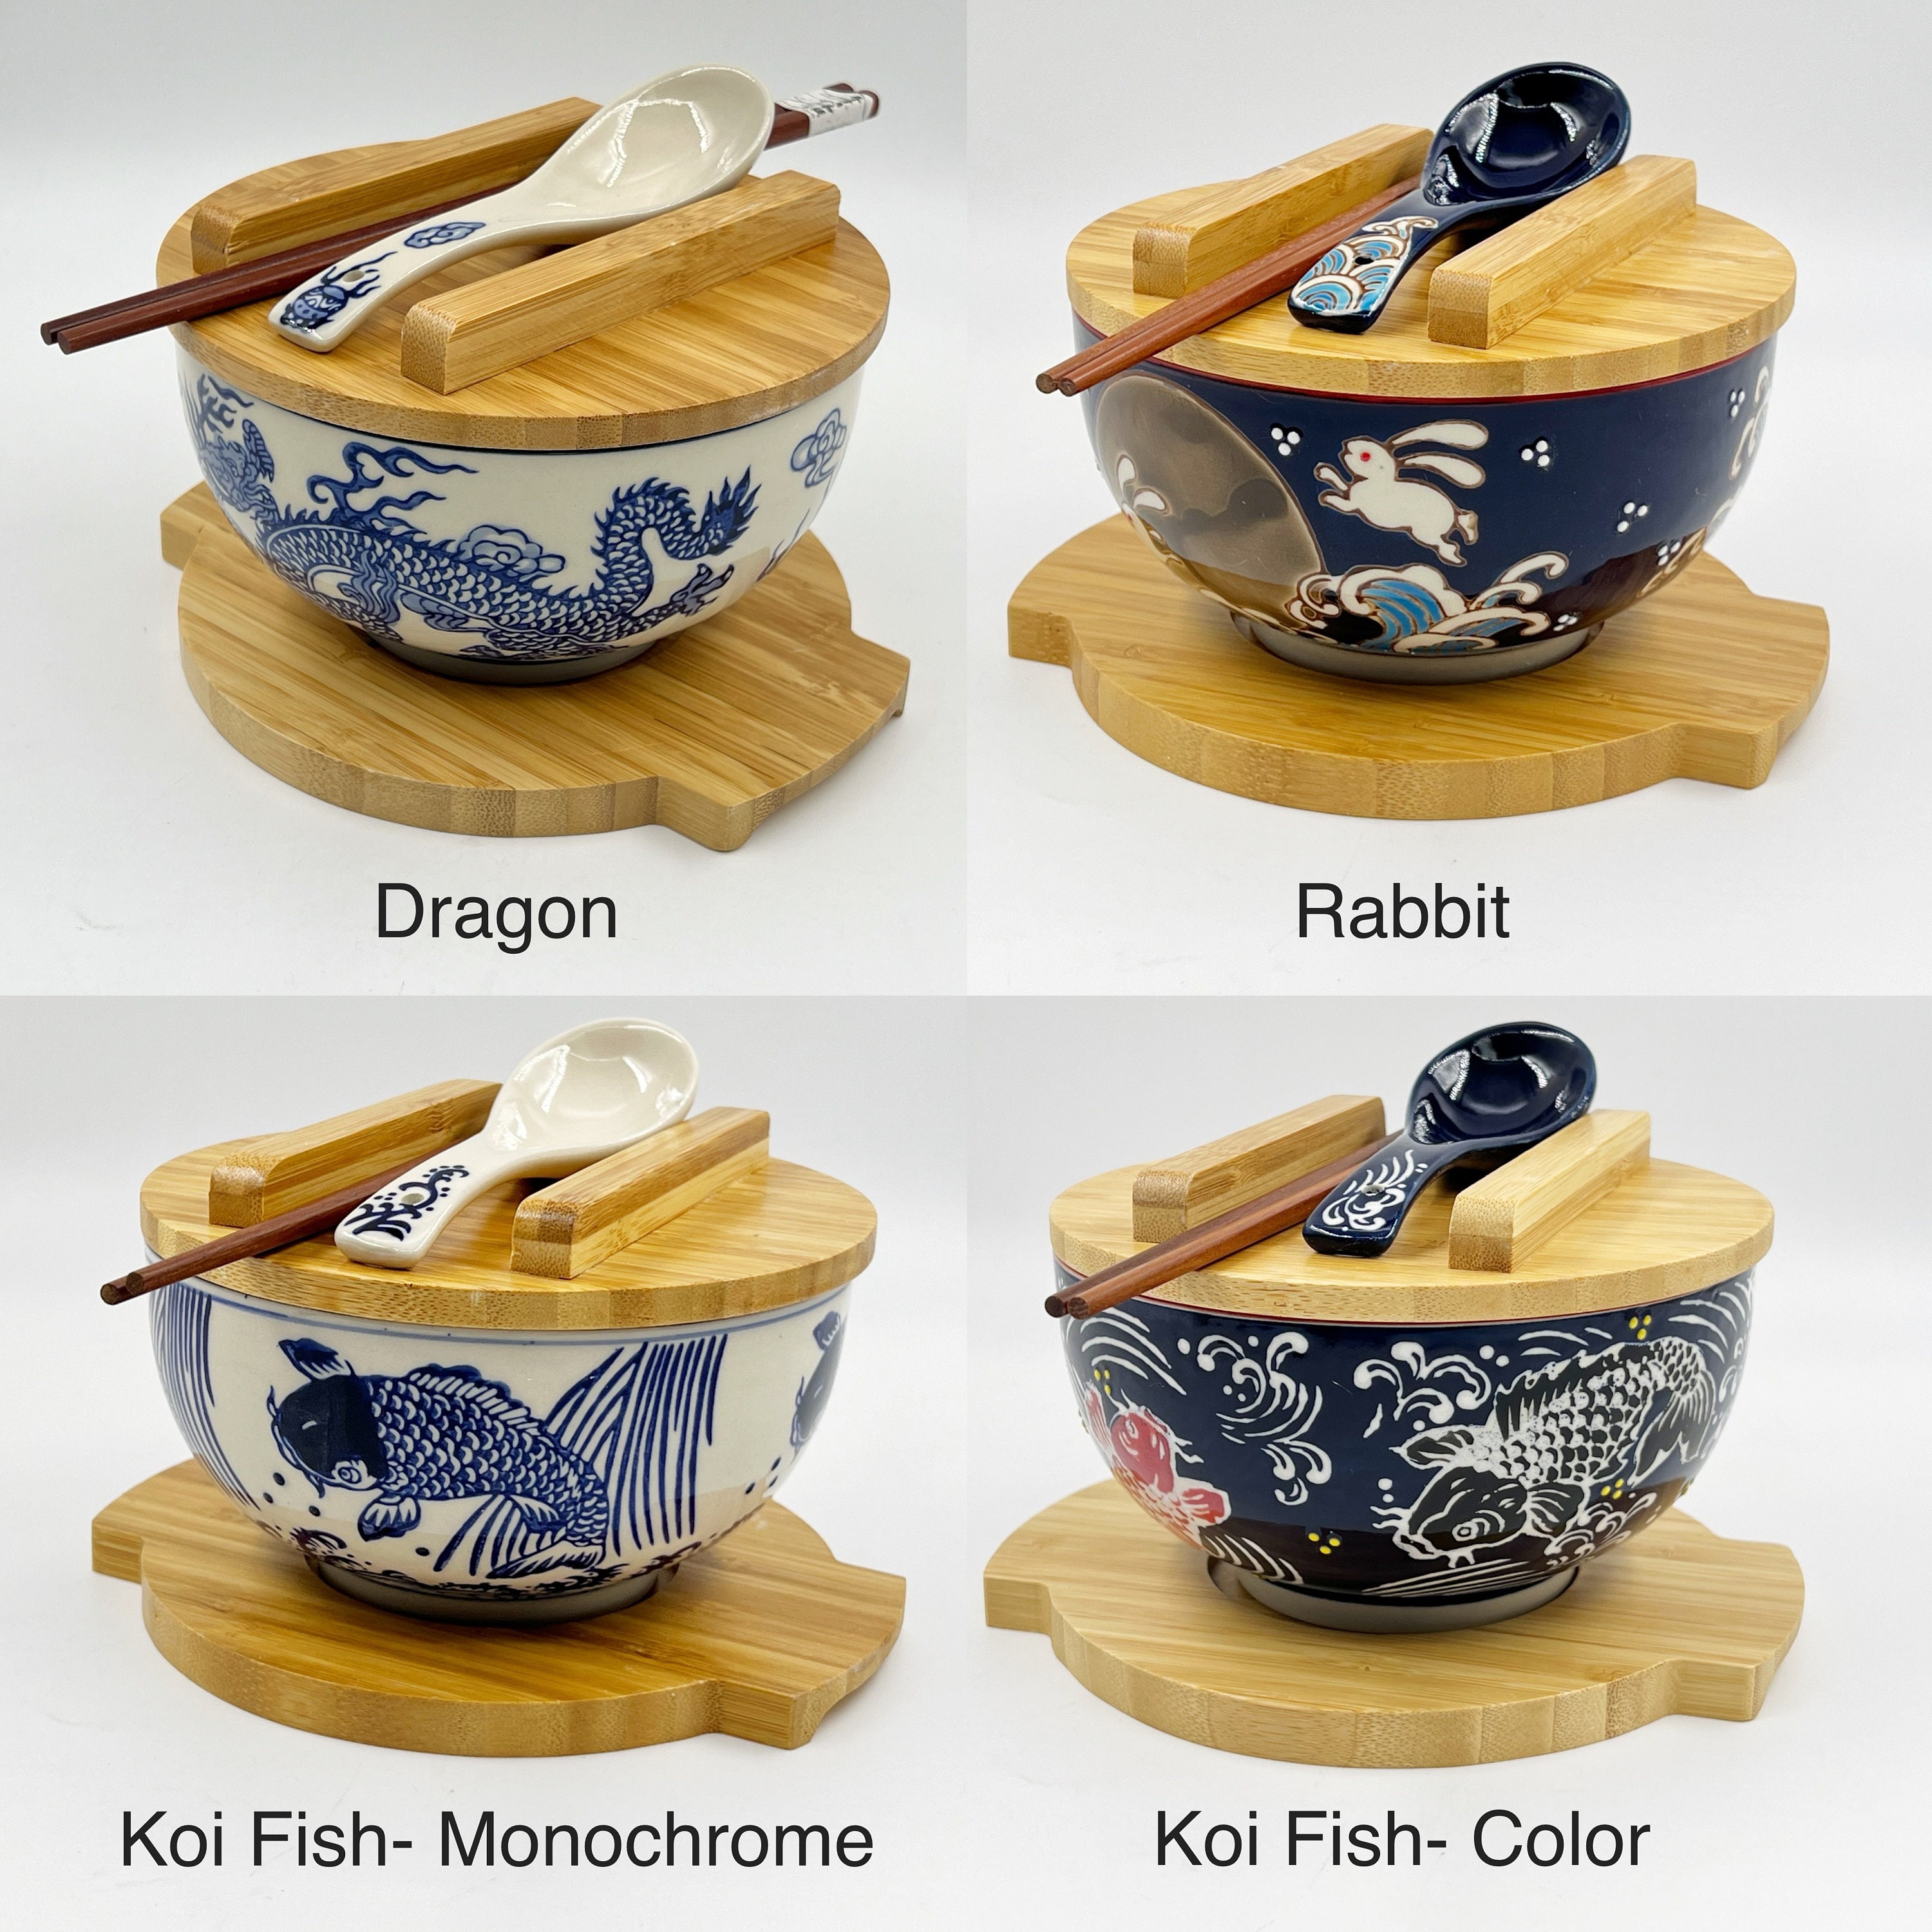 Whitenesser Microvavable Soup Bowl with Lid, Japanese Style Microwavable Ceramic Noodle/Soup Bowls Lid with and Handles (Cyan)